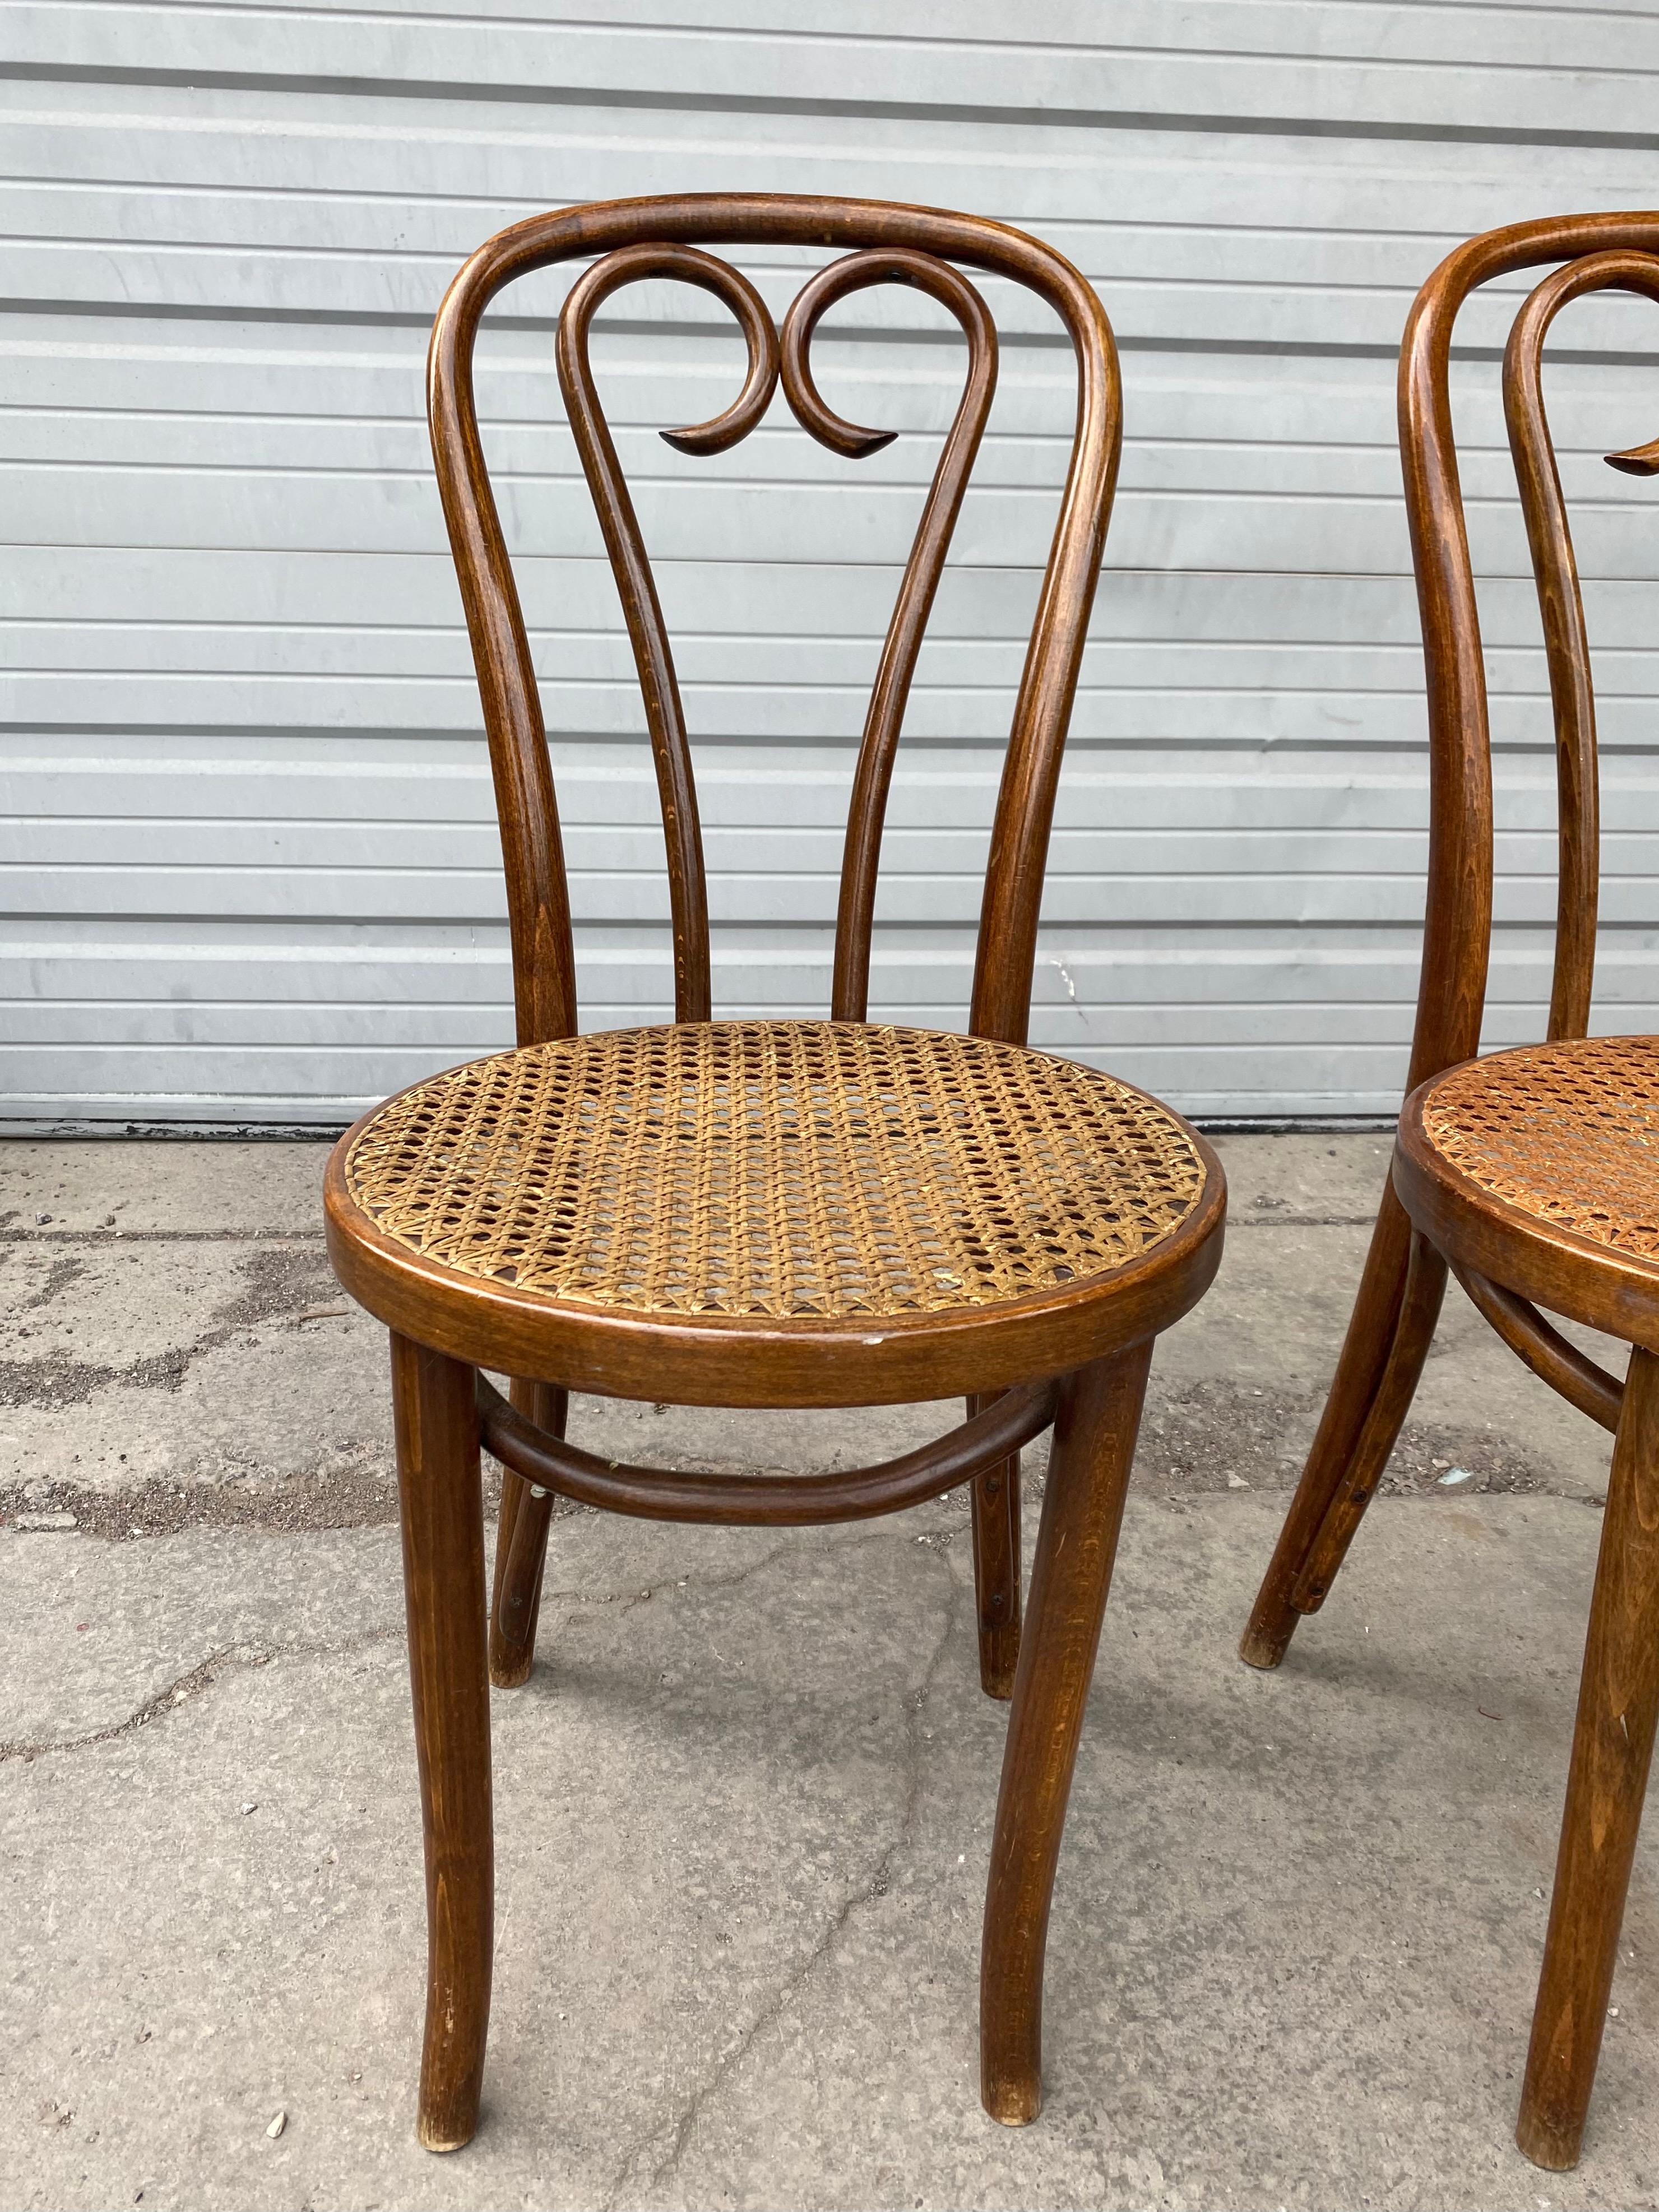 Classic bentwood cafe chairs. Price is for each chair. Chairs are all very tight and well-constructed, having been made in Romania during the sixties. Iconic design from Thonet which has lasted a century and a half. Crafted from beech, chairs are